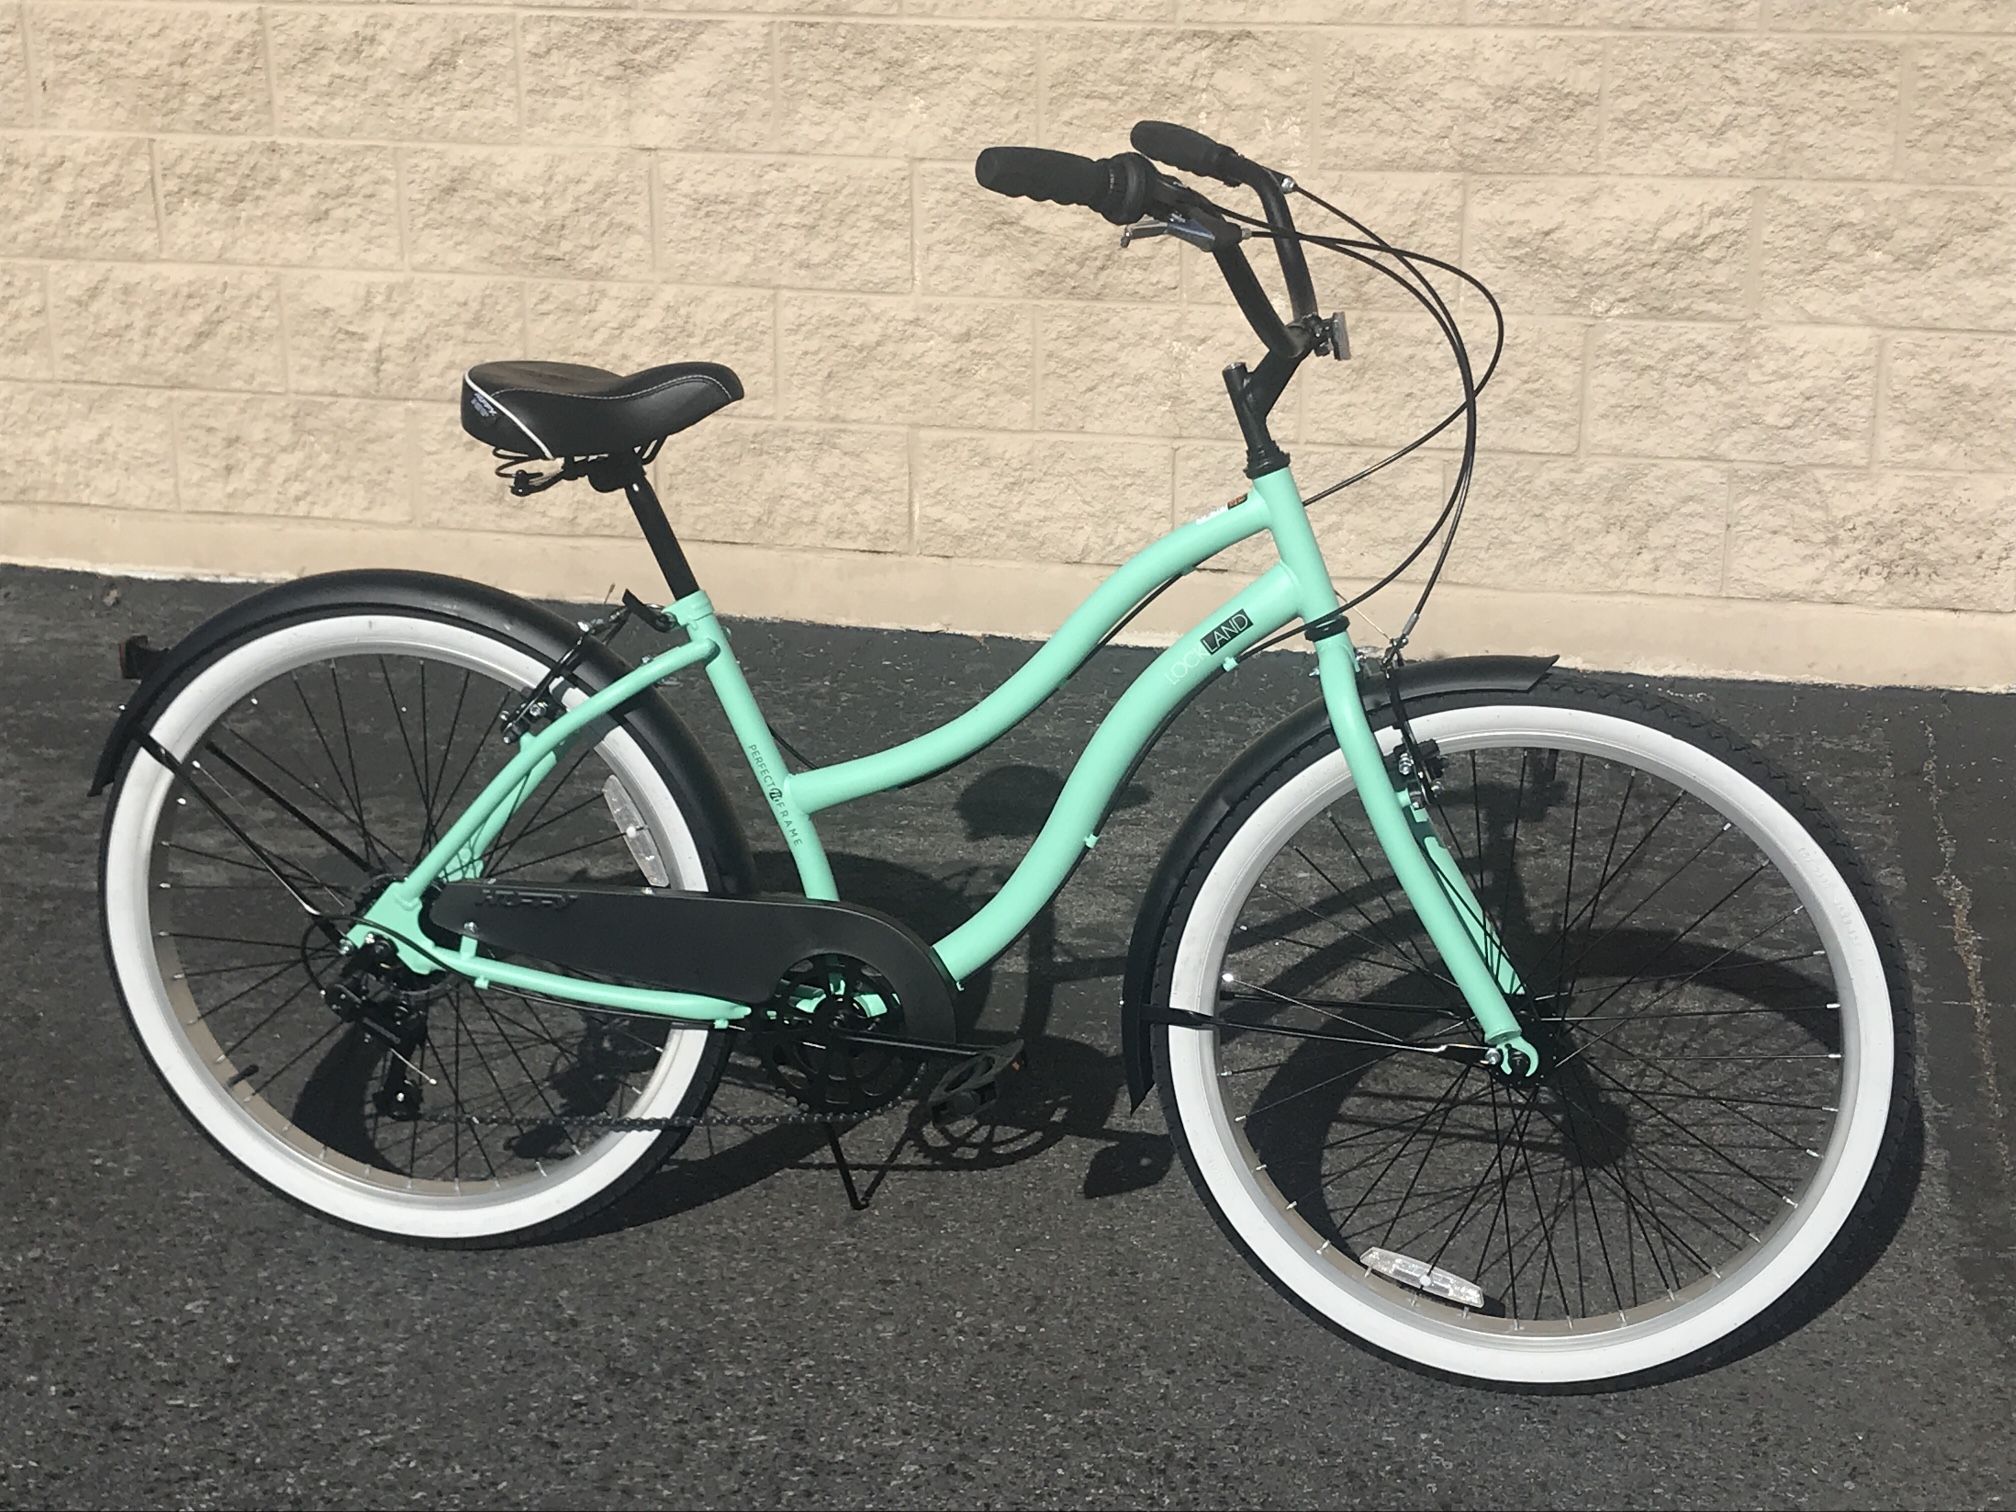 New Bike!!! Women’s 7-speed Beach Cruiser Bicycle, Delivery To Stanford 